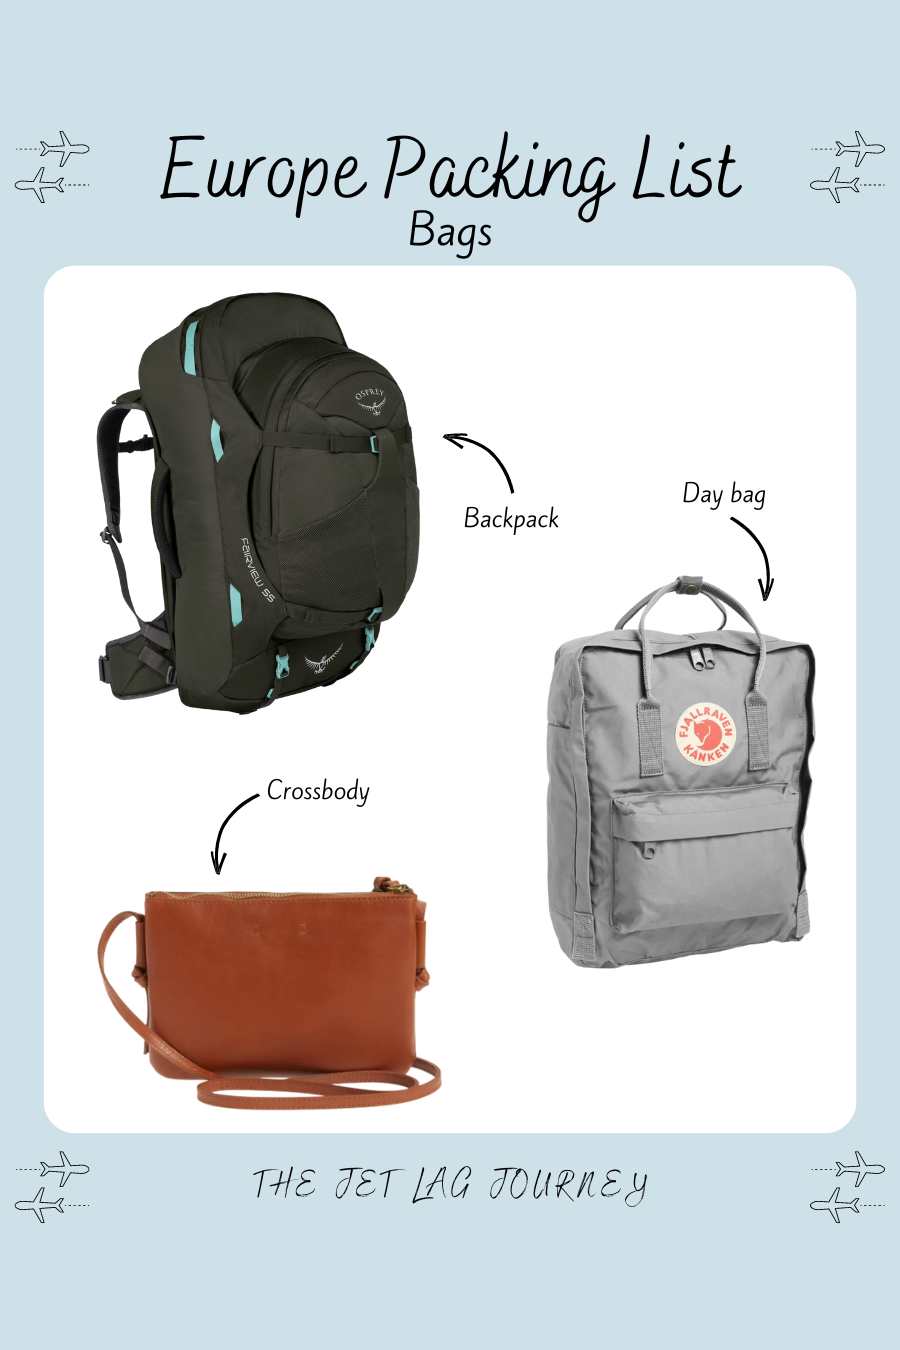 Bags for Backpacking Europe Packing List